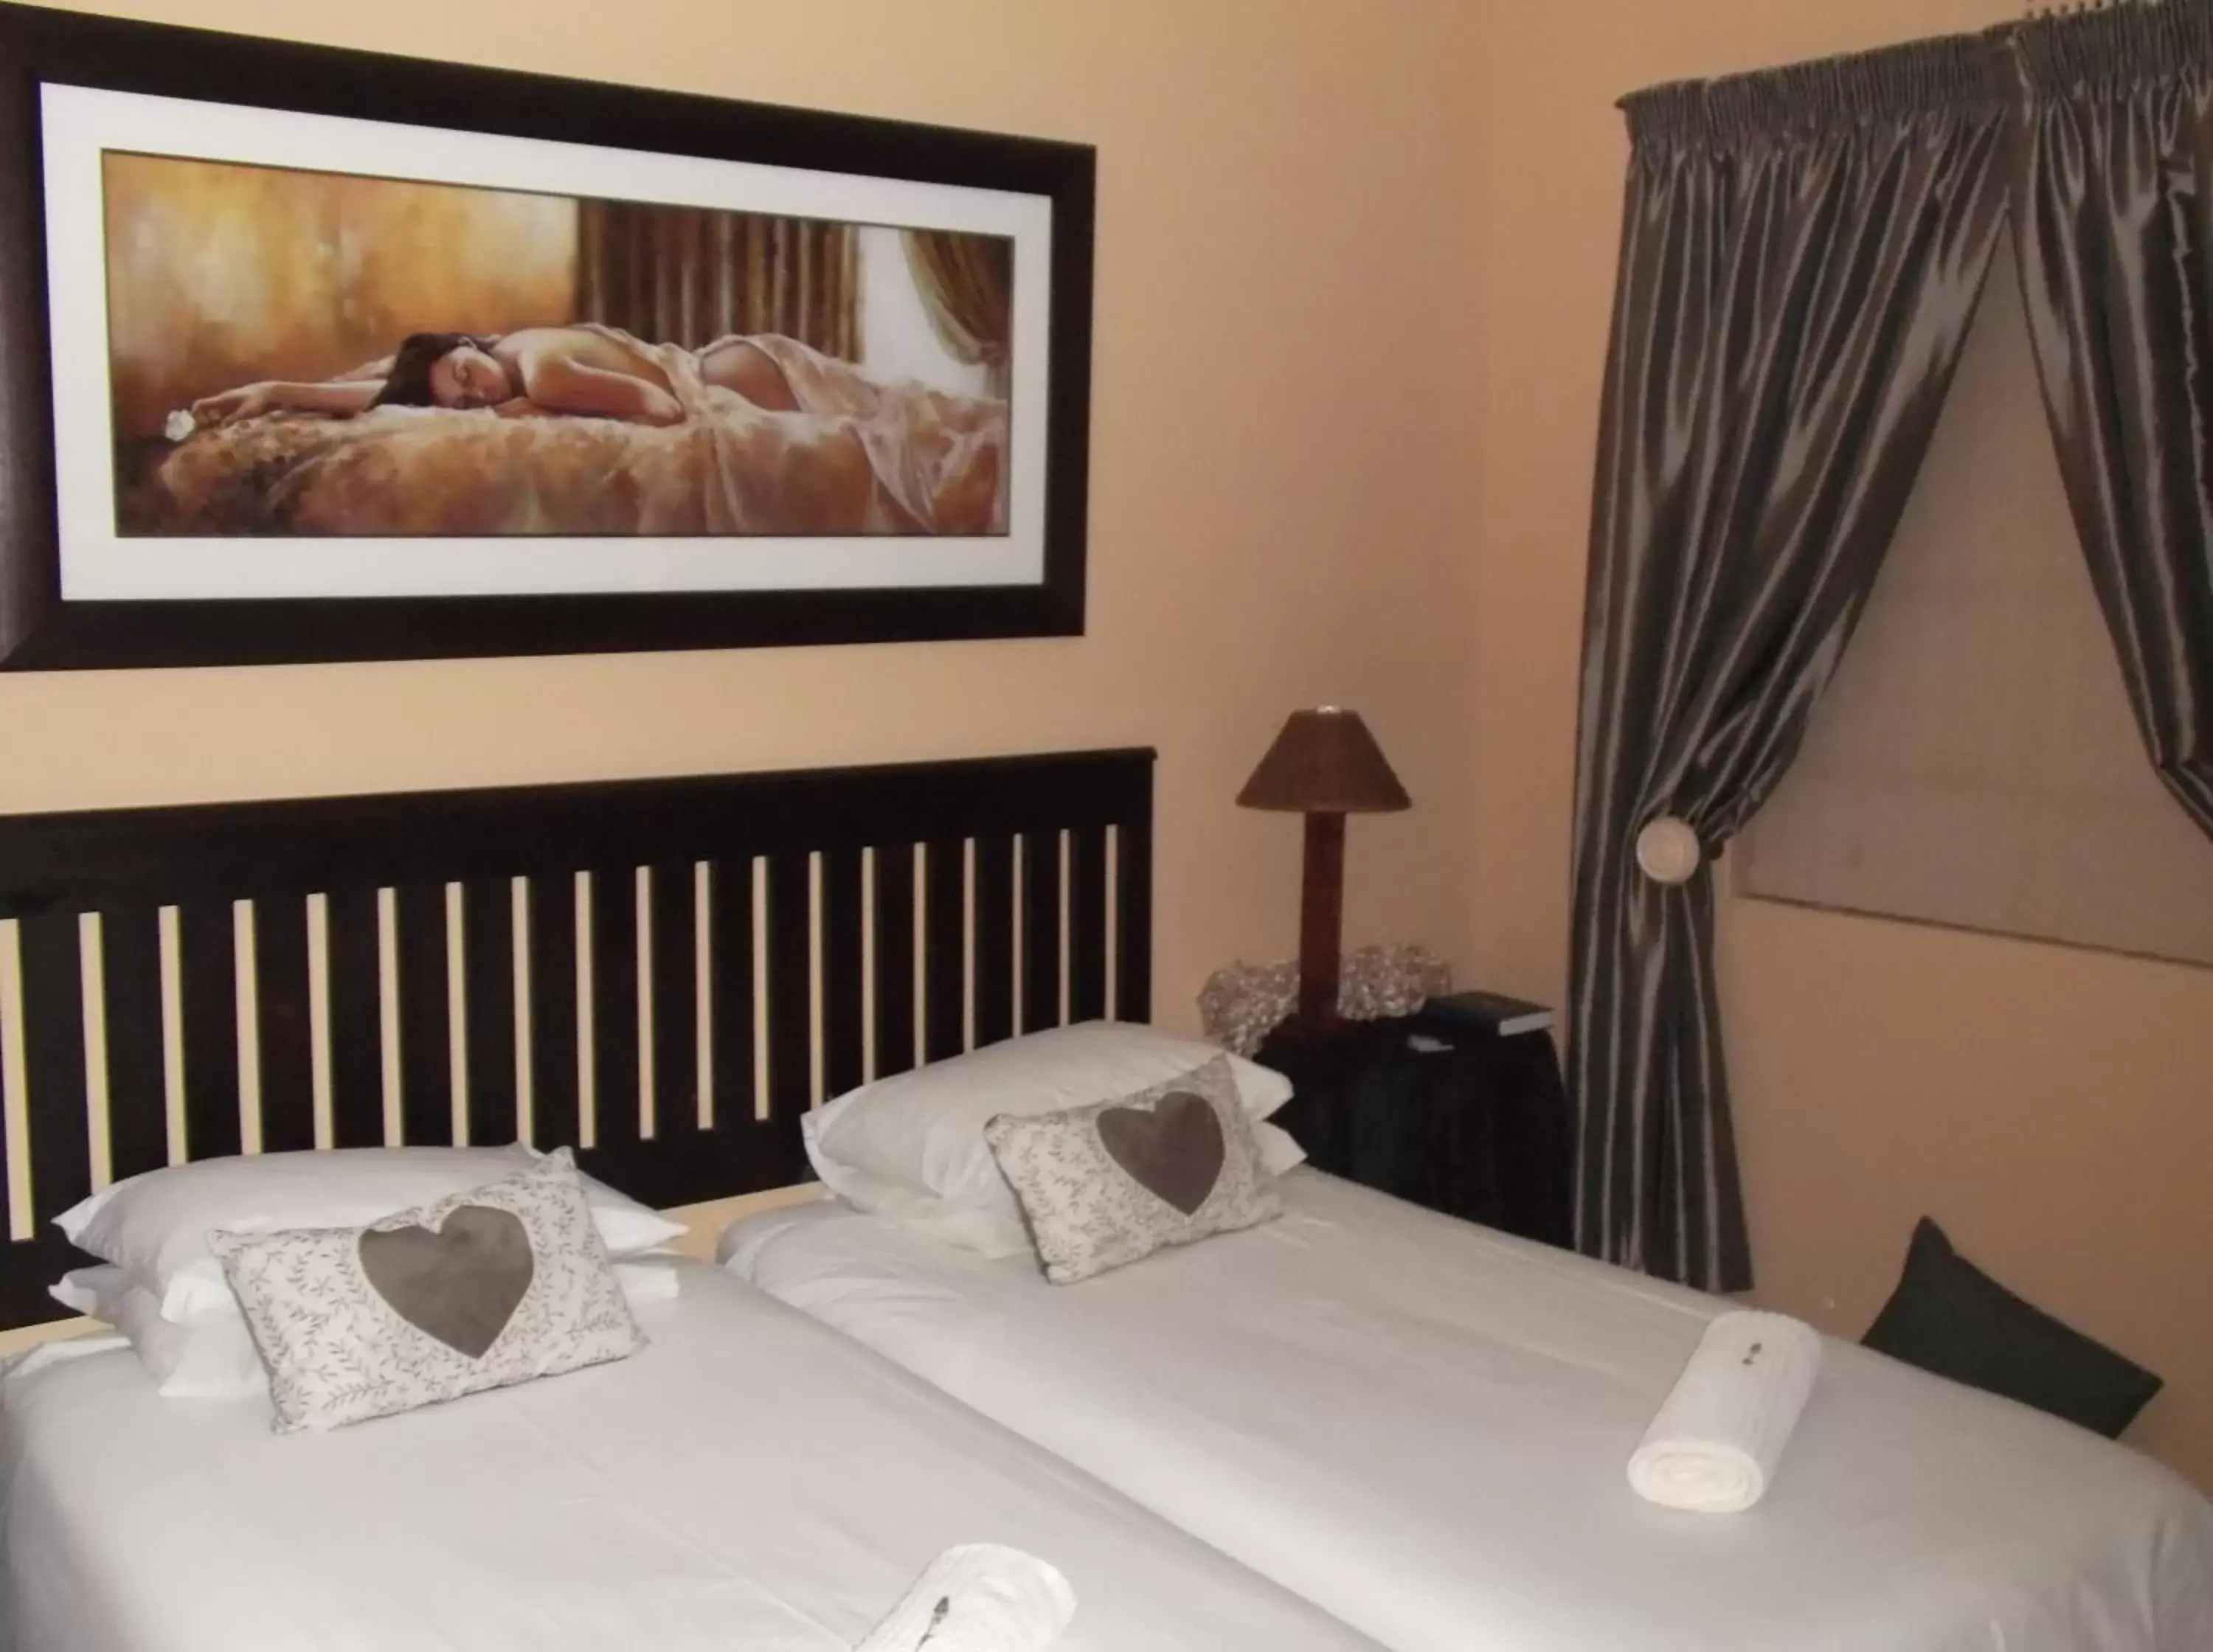 Double Room with Garden View in Old Mill Lodge, Seasonal Working Ostrich Farm & Restaurant, Oudtshoorn